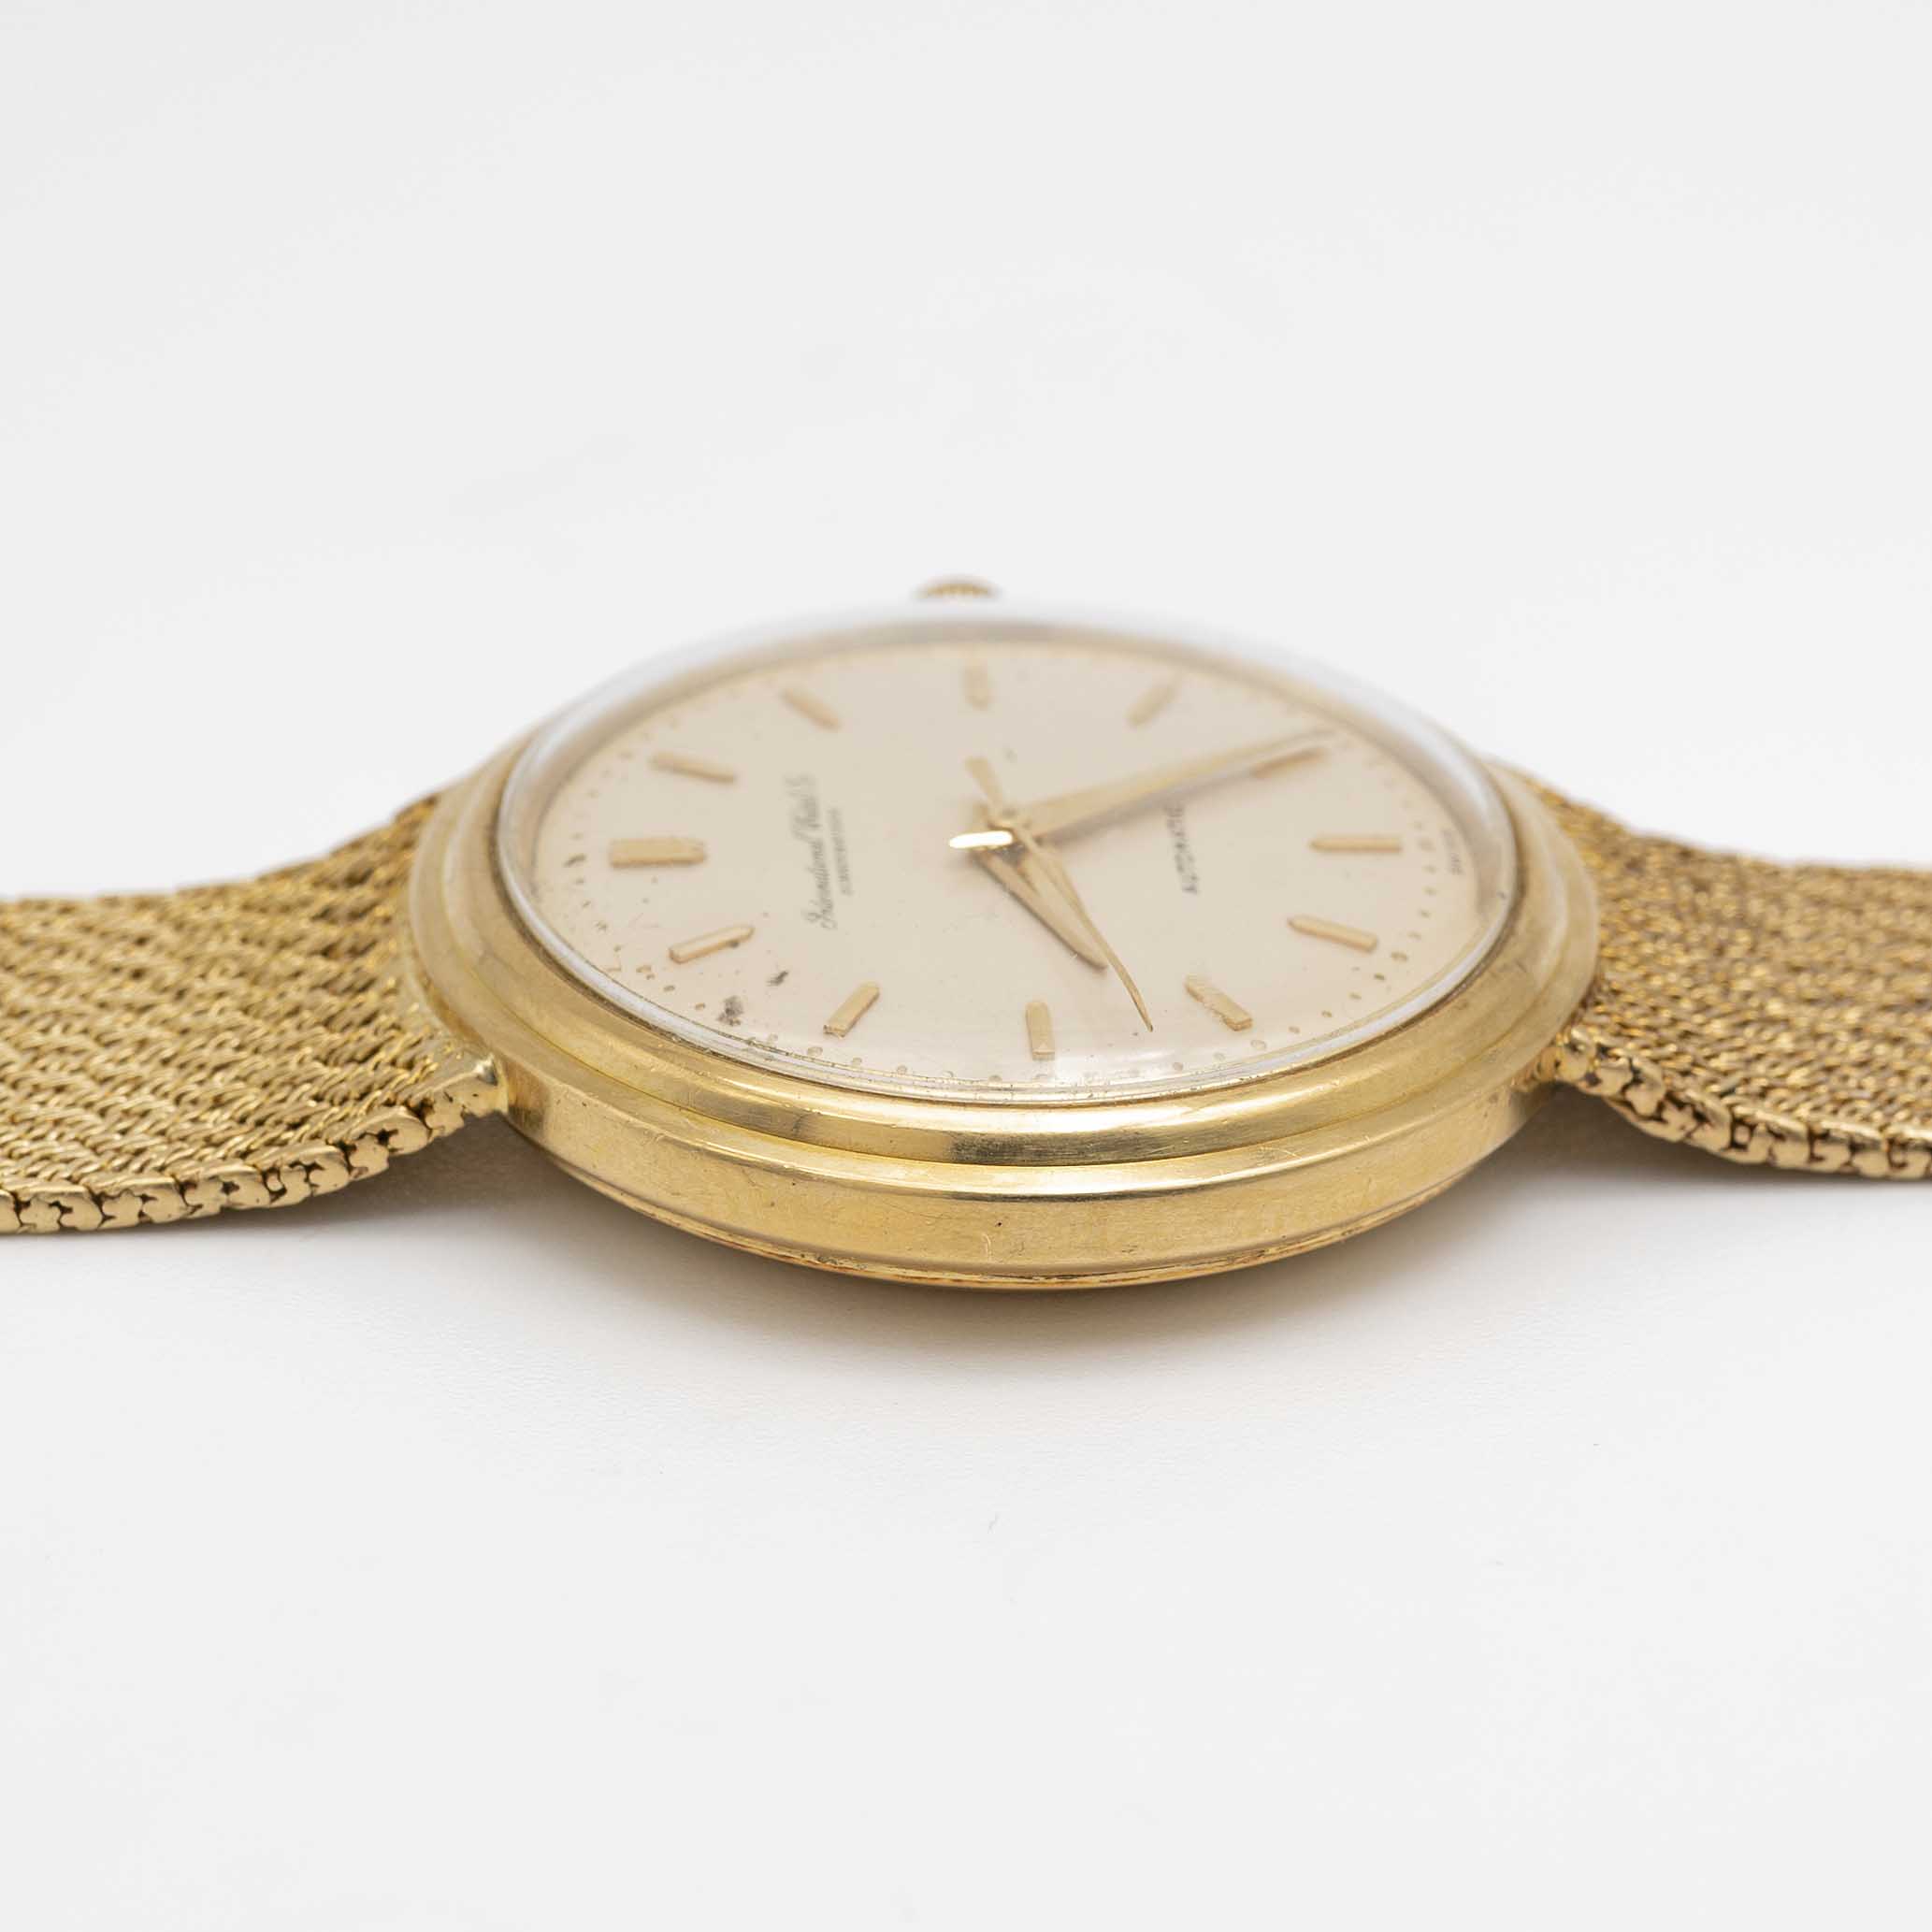 A GENTLEMAN'S 18K SOLID YELLOW GOLD IWC AUTOMATIC BRACELET WATCH CIRCA 1970s Movement: 21J, - Image 8 of 9